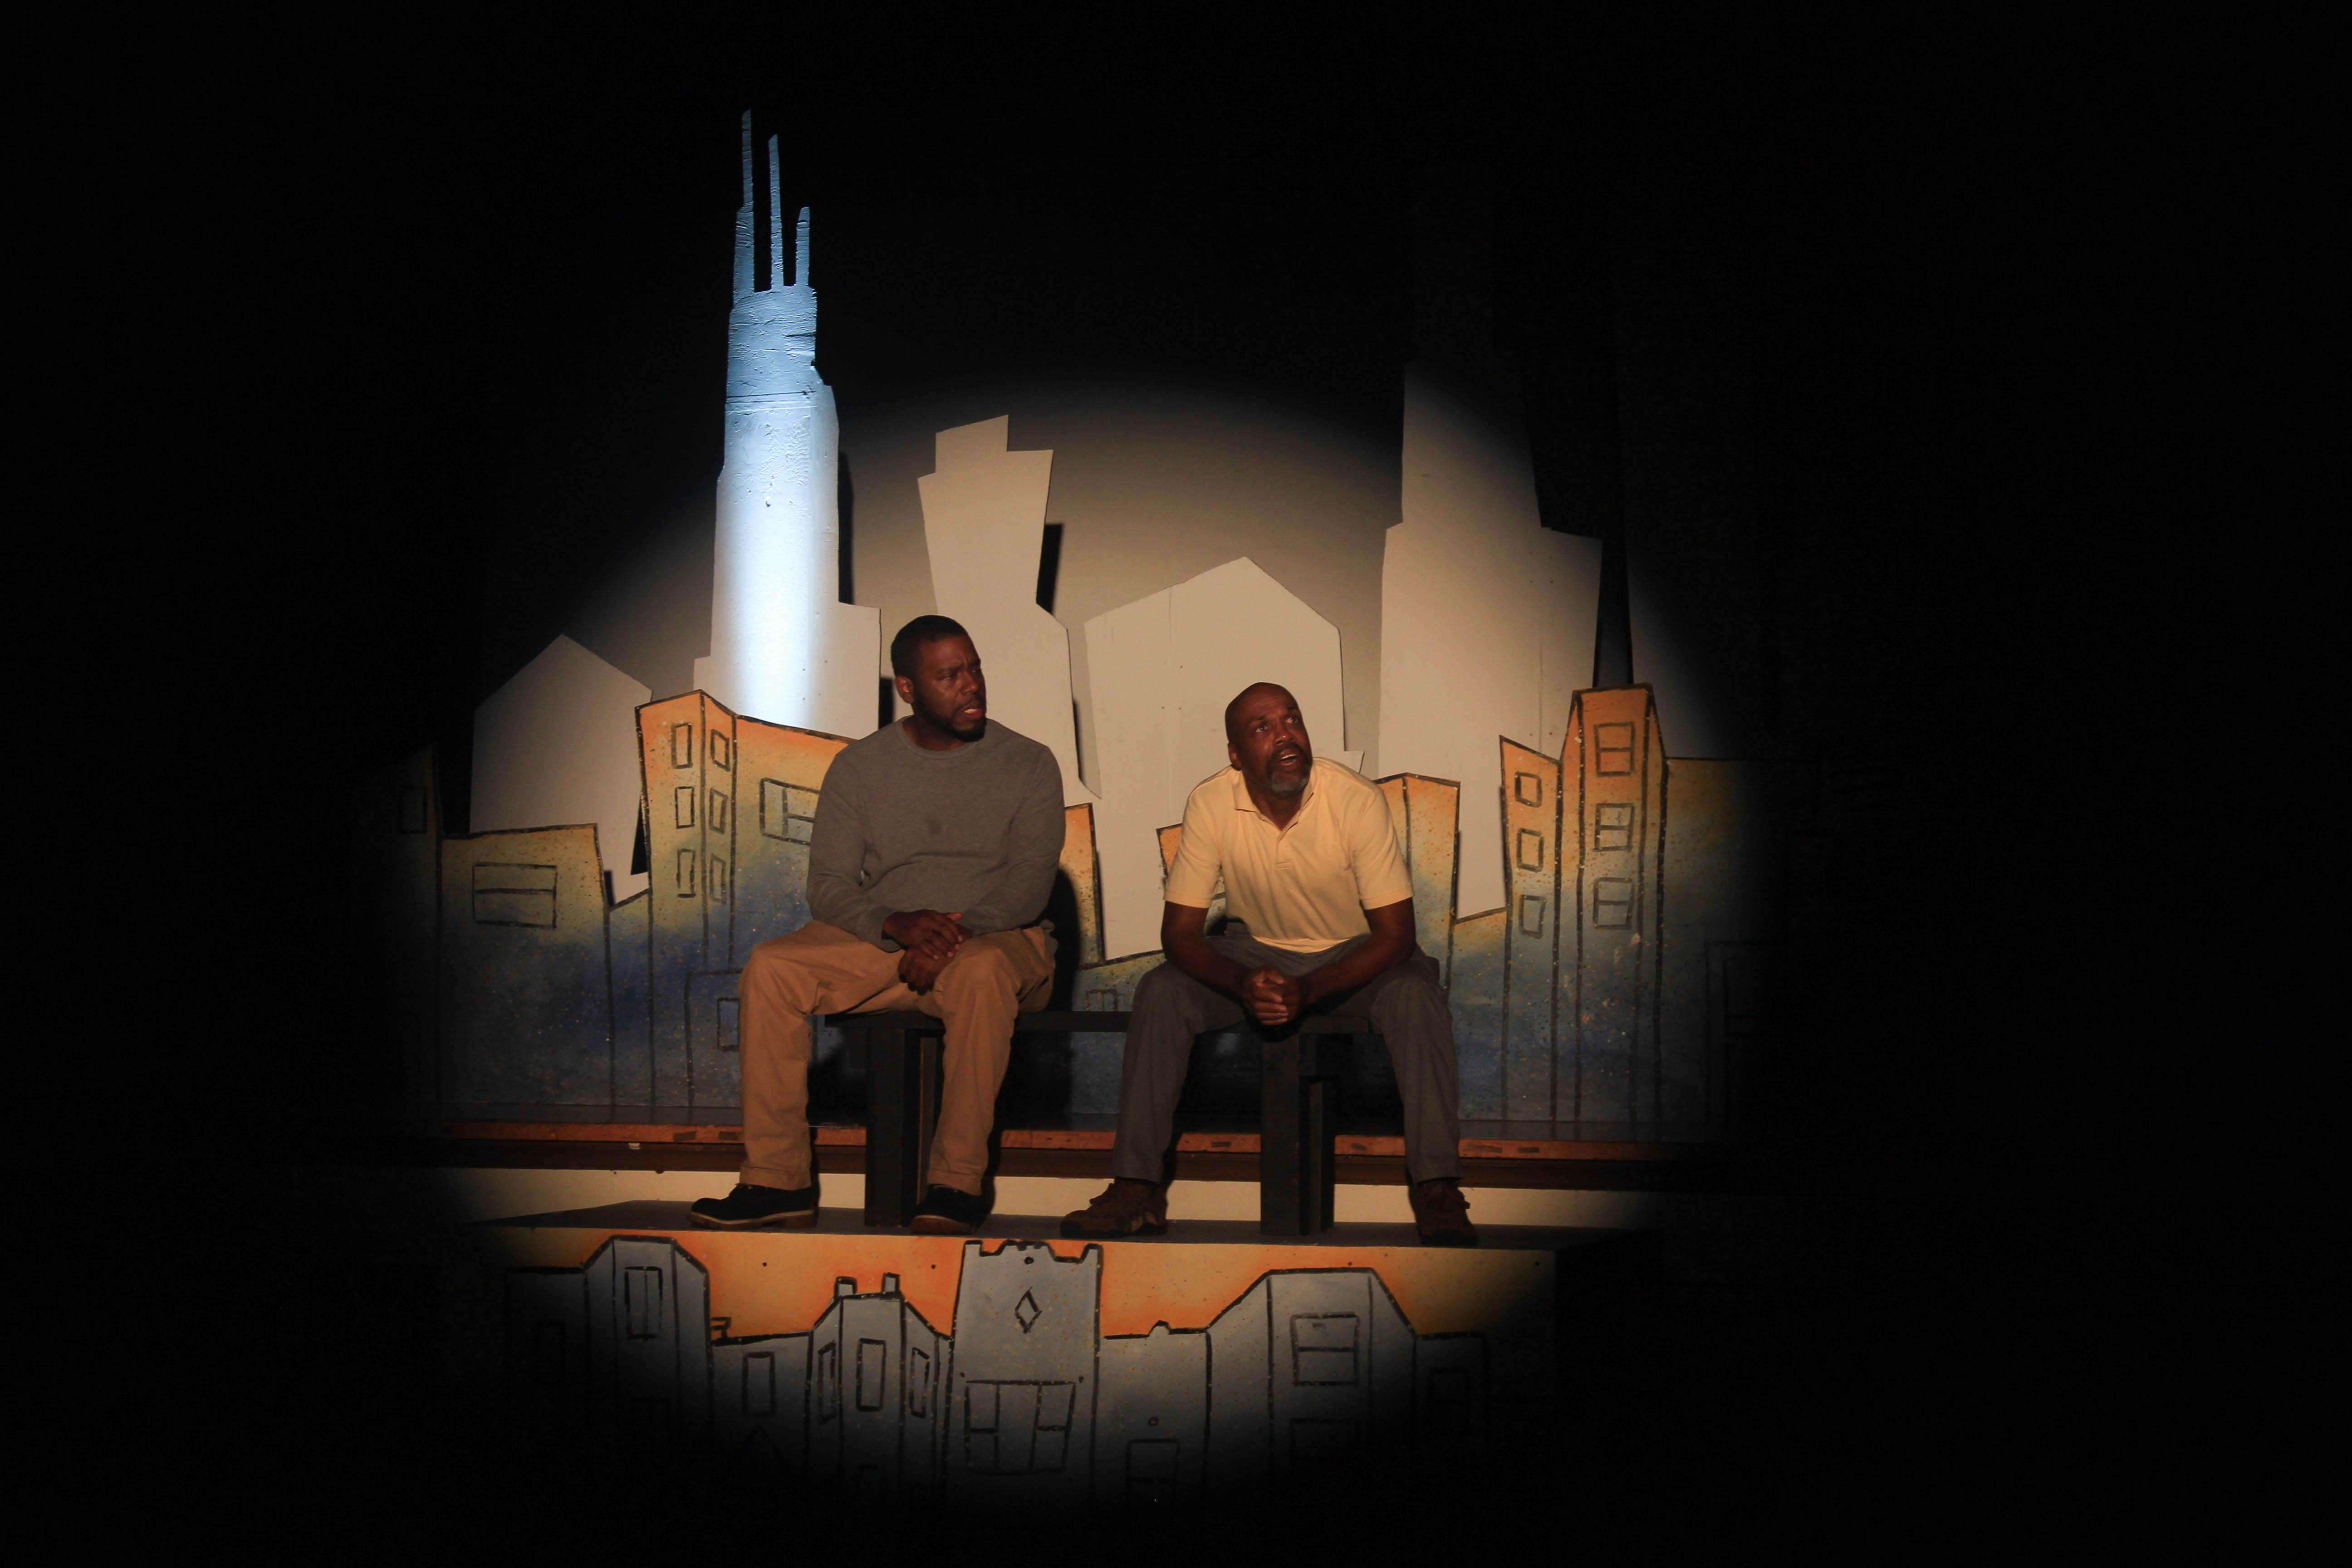 Kenneth Johnson and Brandon Boler discuss grief while waiting for a train in "Dandelions" (Meredith Melland, 14 East)